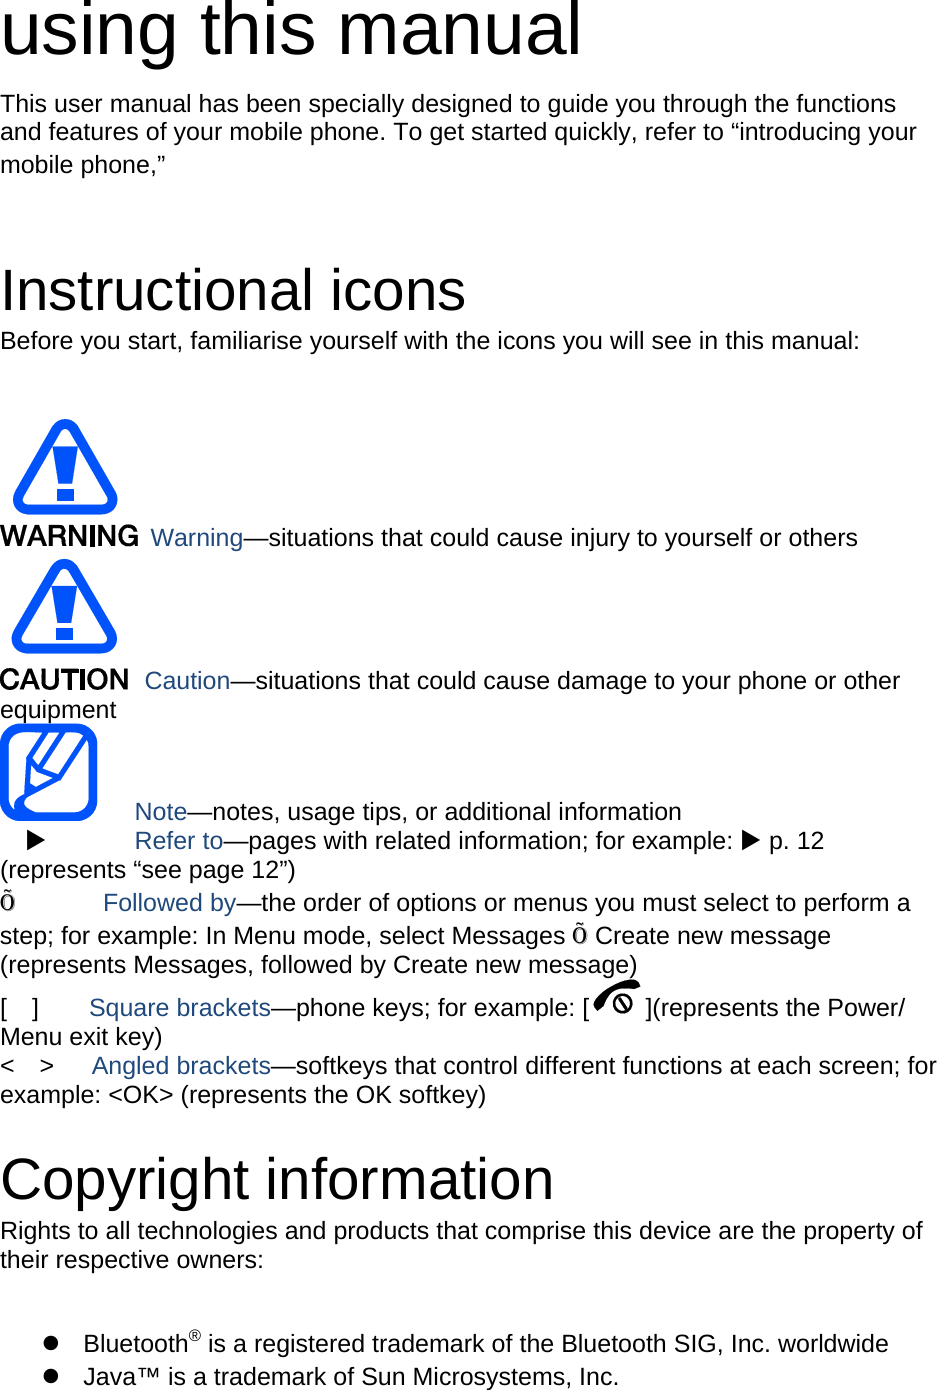 using this manual This user manual has been specially designed to guide you through the functions and features of your mobile phone. To get started quickly, refer to “introducing your mobile phone,”  Instructional icons Before you start, familiarise yourself with the icons you will see in this manual:     Warning—situations that could cause injury to yourself or others  Caution—situations that could cause damage to your phone or other equipment    Note—notes, usage tips, or additional information   X       Refer to—pages with related information; for example: X p. 12 (represents “see page 12”) Õ       Followed by—the order of options or menus you must select to perform a step; for example: In Menu mode, select Messages Õ Create new message (represents Messages, followed by Create new message) [  ]    Square brackets—phone keys; for example: [ ](represents the Power/ Menu exit key) &lt;  &gt;   Angled brackets—softkeys that control different functions at each screen; for example: &lt;OK&gt; (represents the OK softkey)  Copyright information Rights to all technologies and products that comprise this device are the property of their respective owners:  z Bluetooth® is a registered trademark of the Bluetooth SIG, Inc. worldwide z  Java™ is a trademark of Sun Microsystems, Inc. 